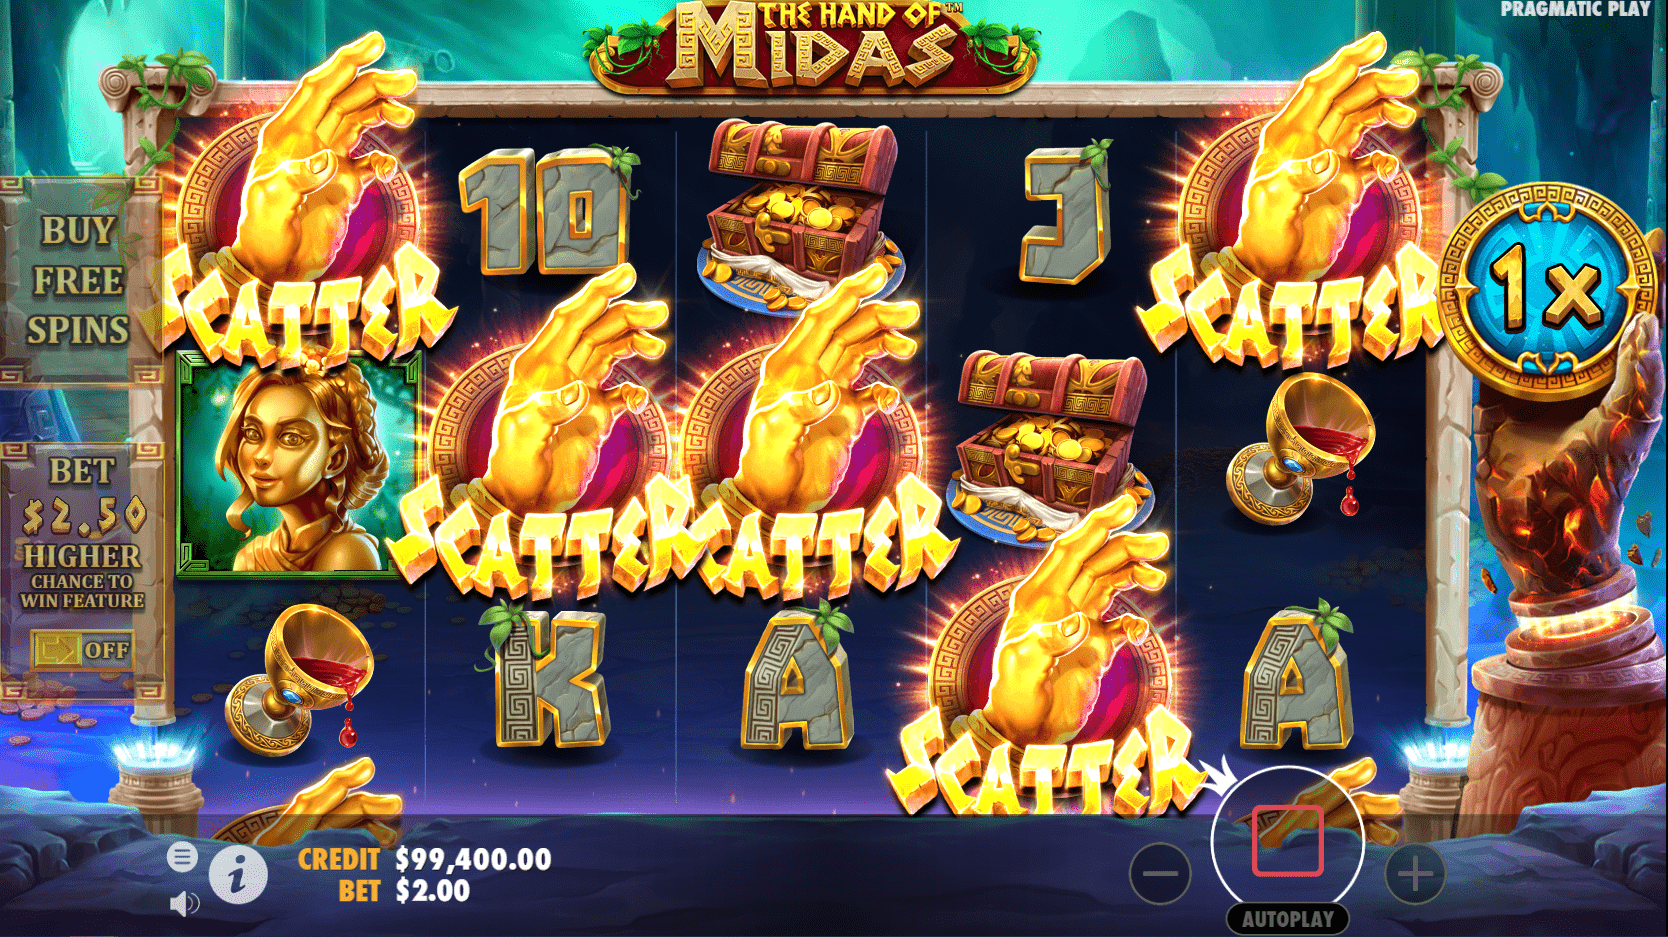 The-hand-of-Midas-Slot-Machine-Five-Scatters